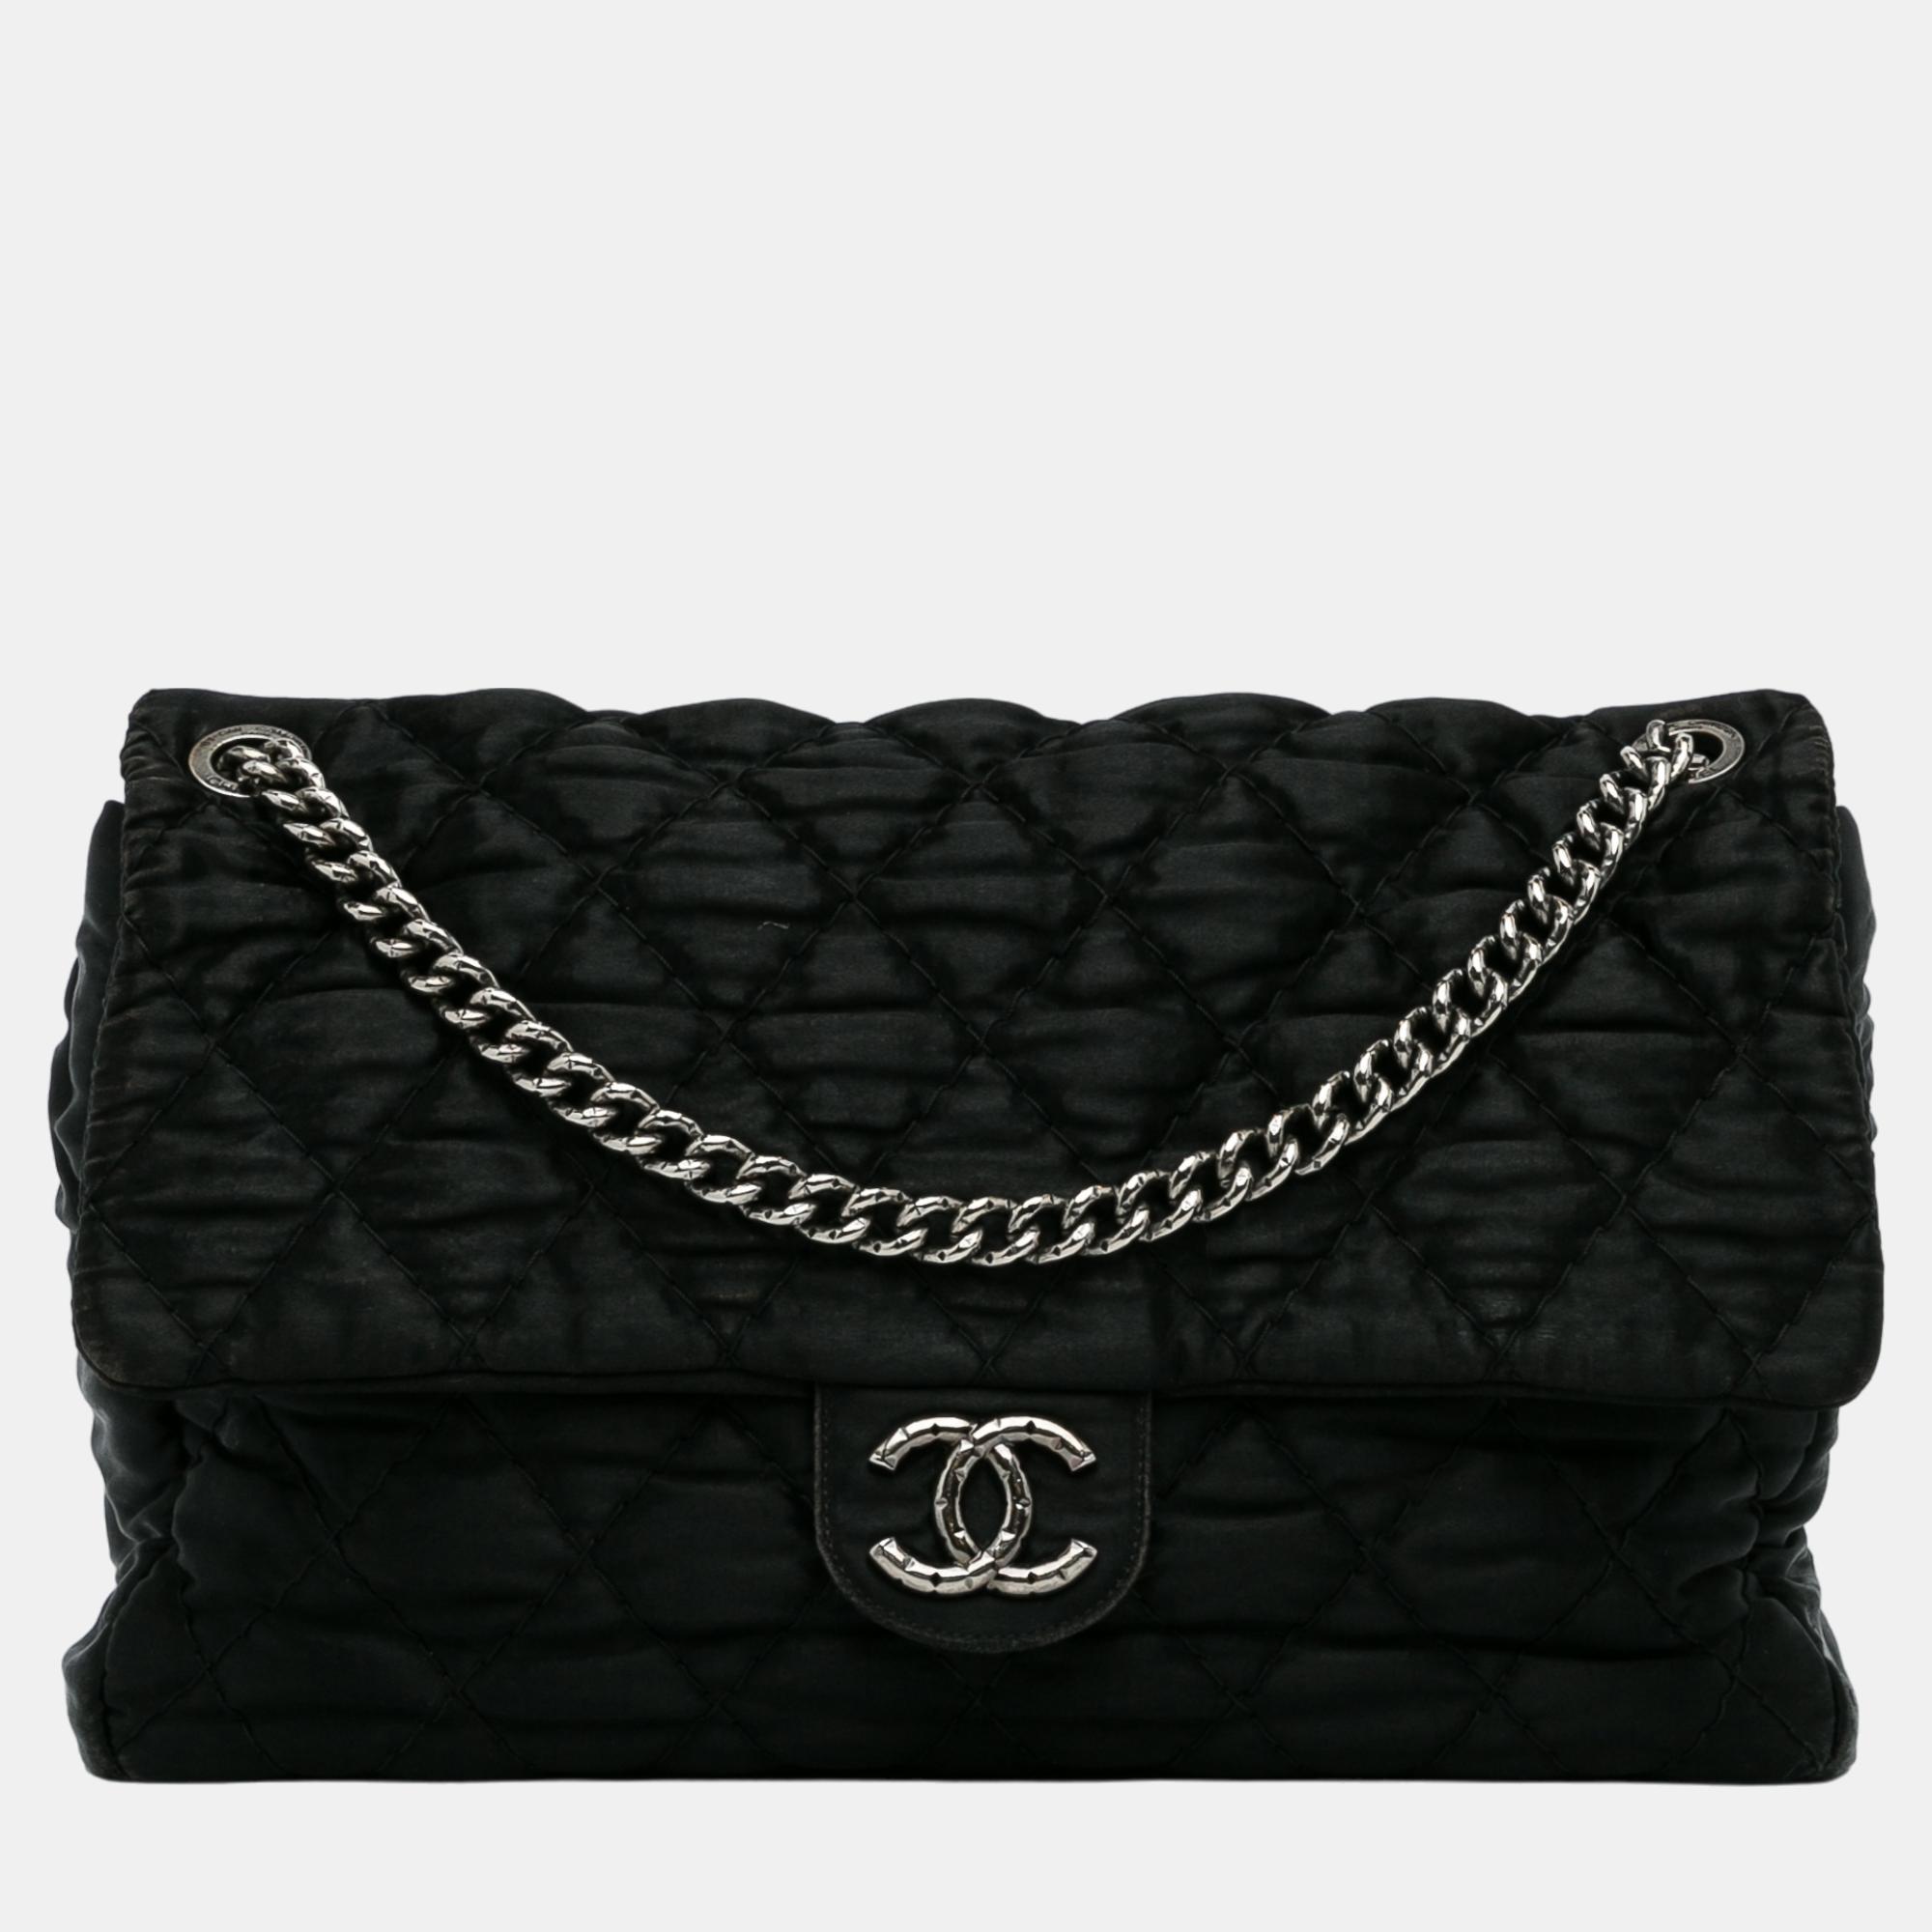 Chanel Black Quilted Satin Chain Flap